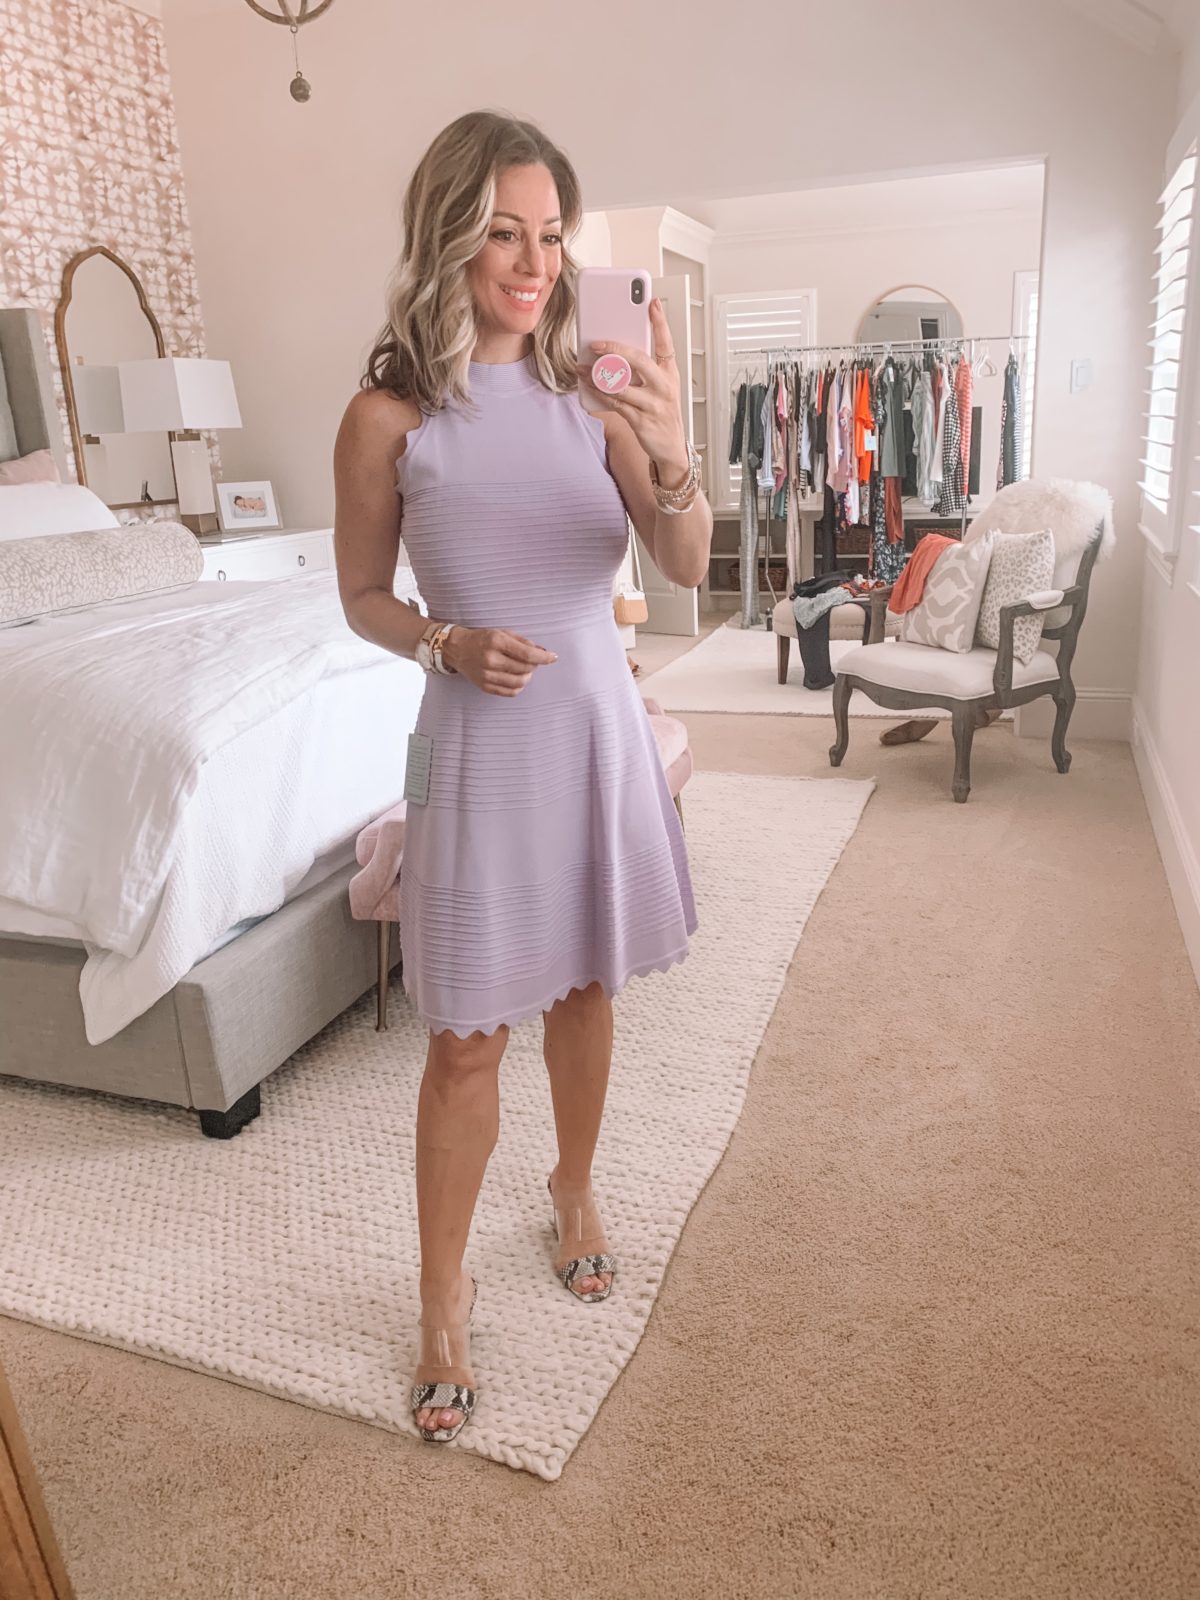 Dressing Room Finds Nordstrom and LOFT, Lilac Fit and Flare Sweater Dress, Clear Heels